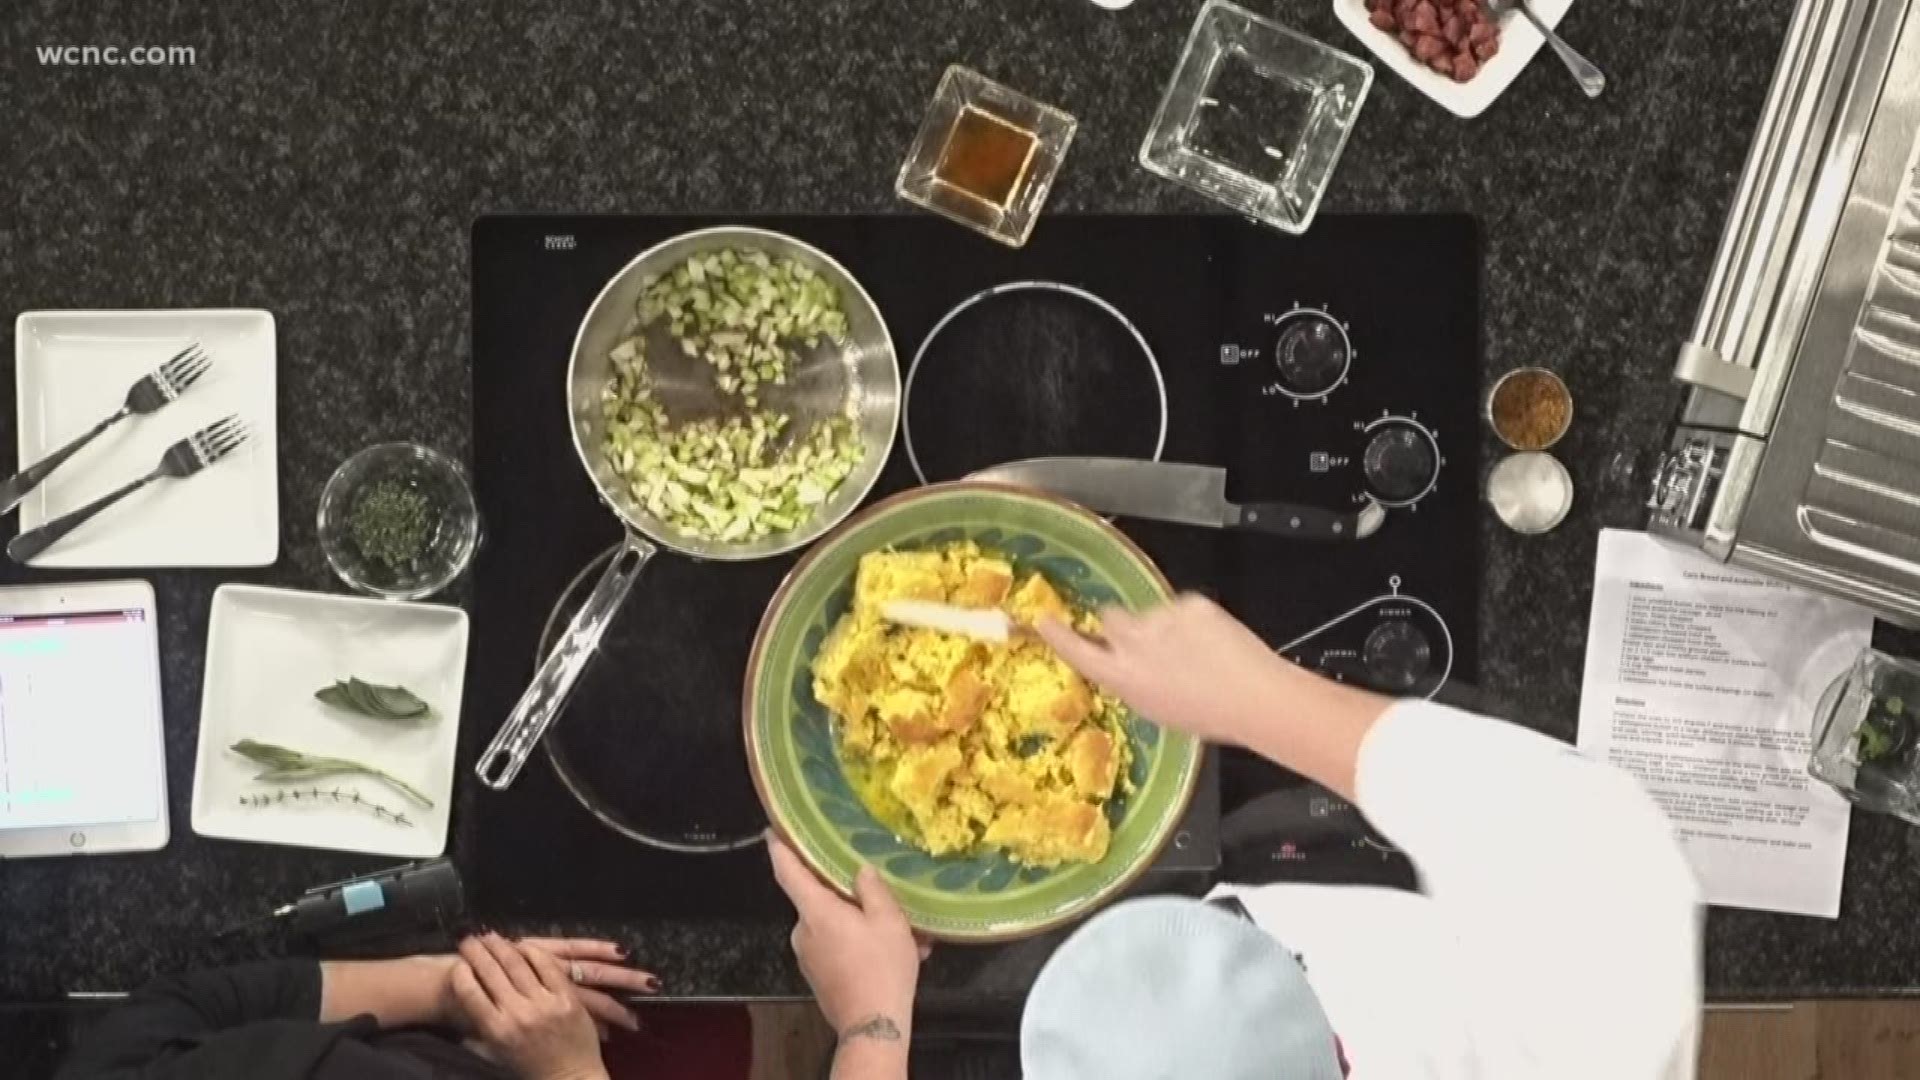 Chef Ross Purple shows us how to make it